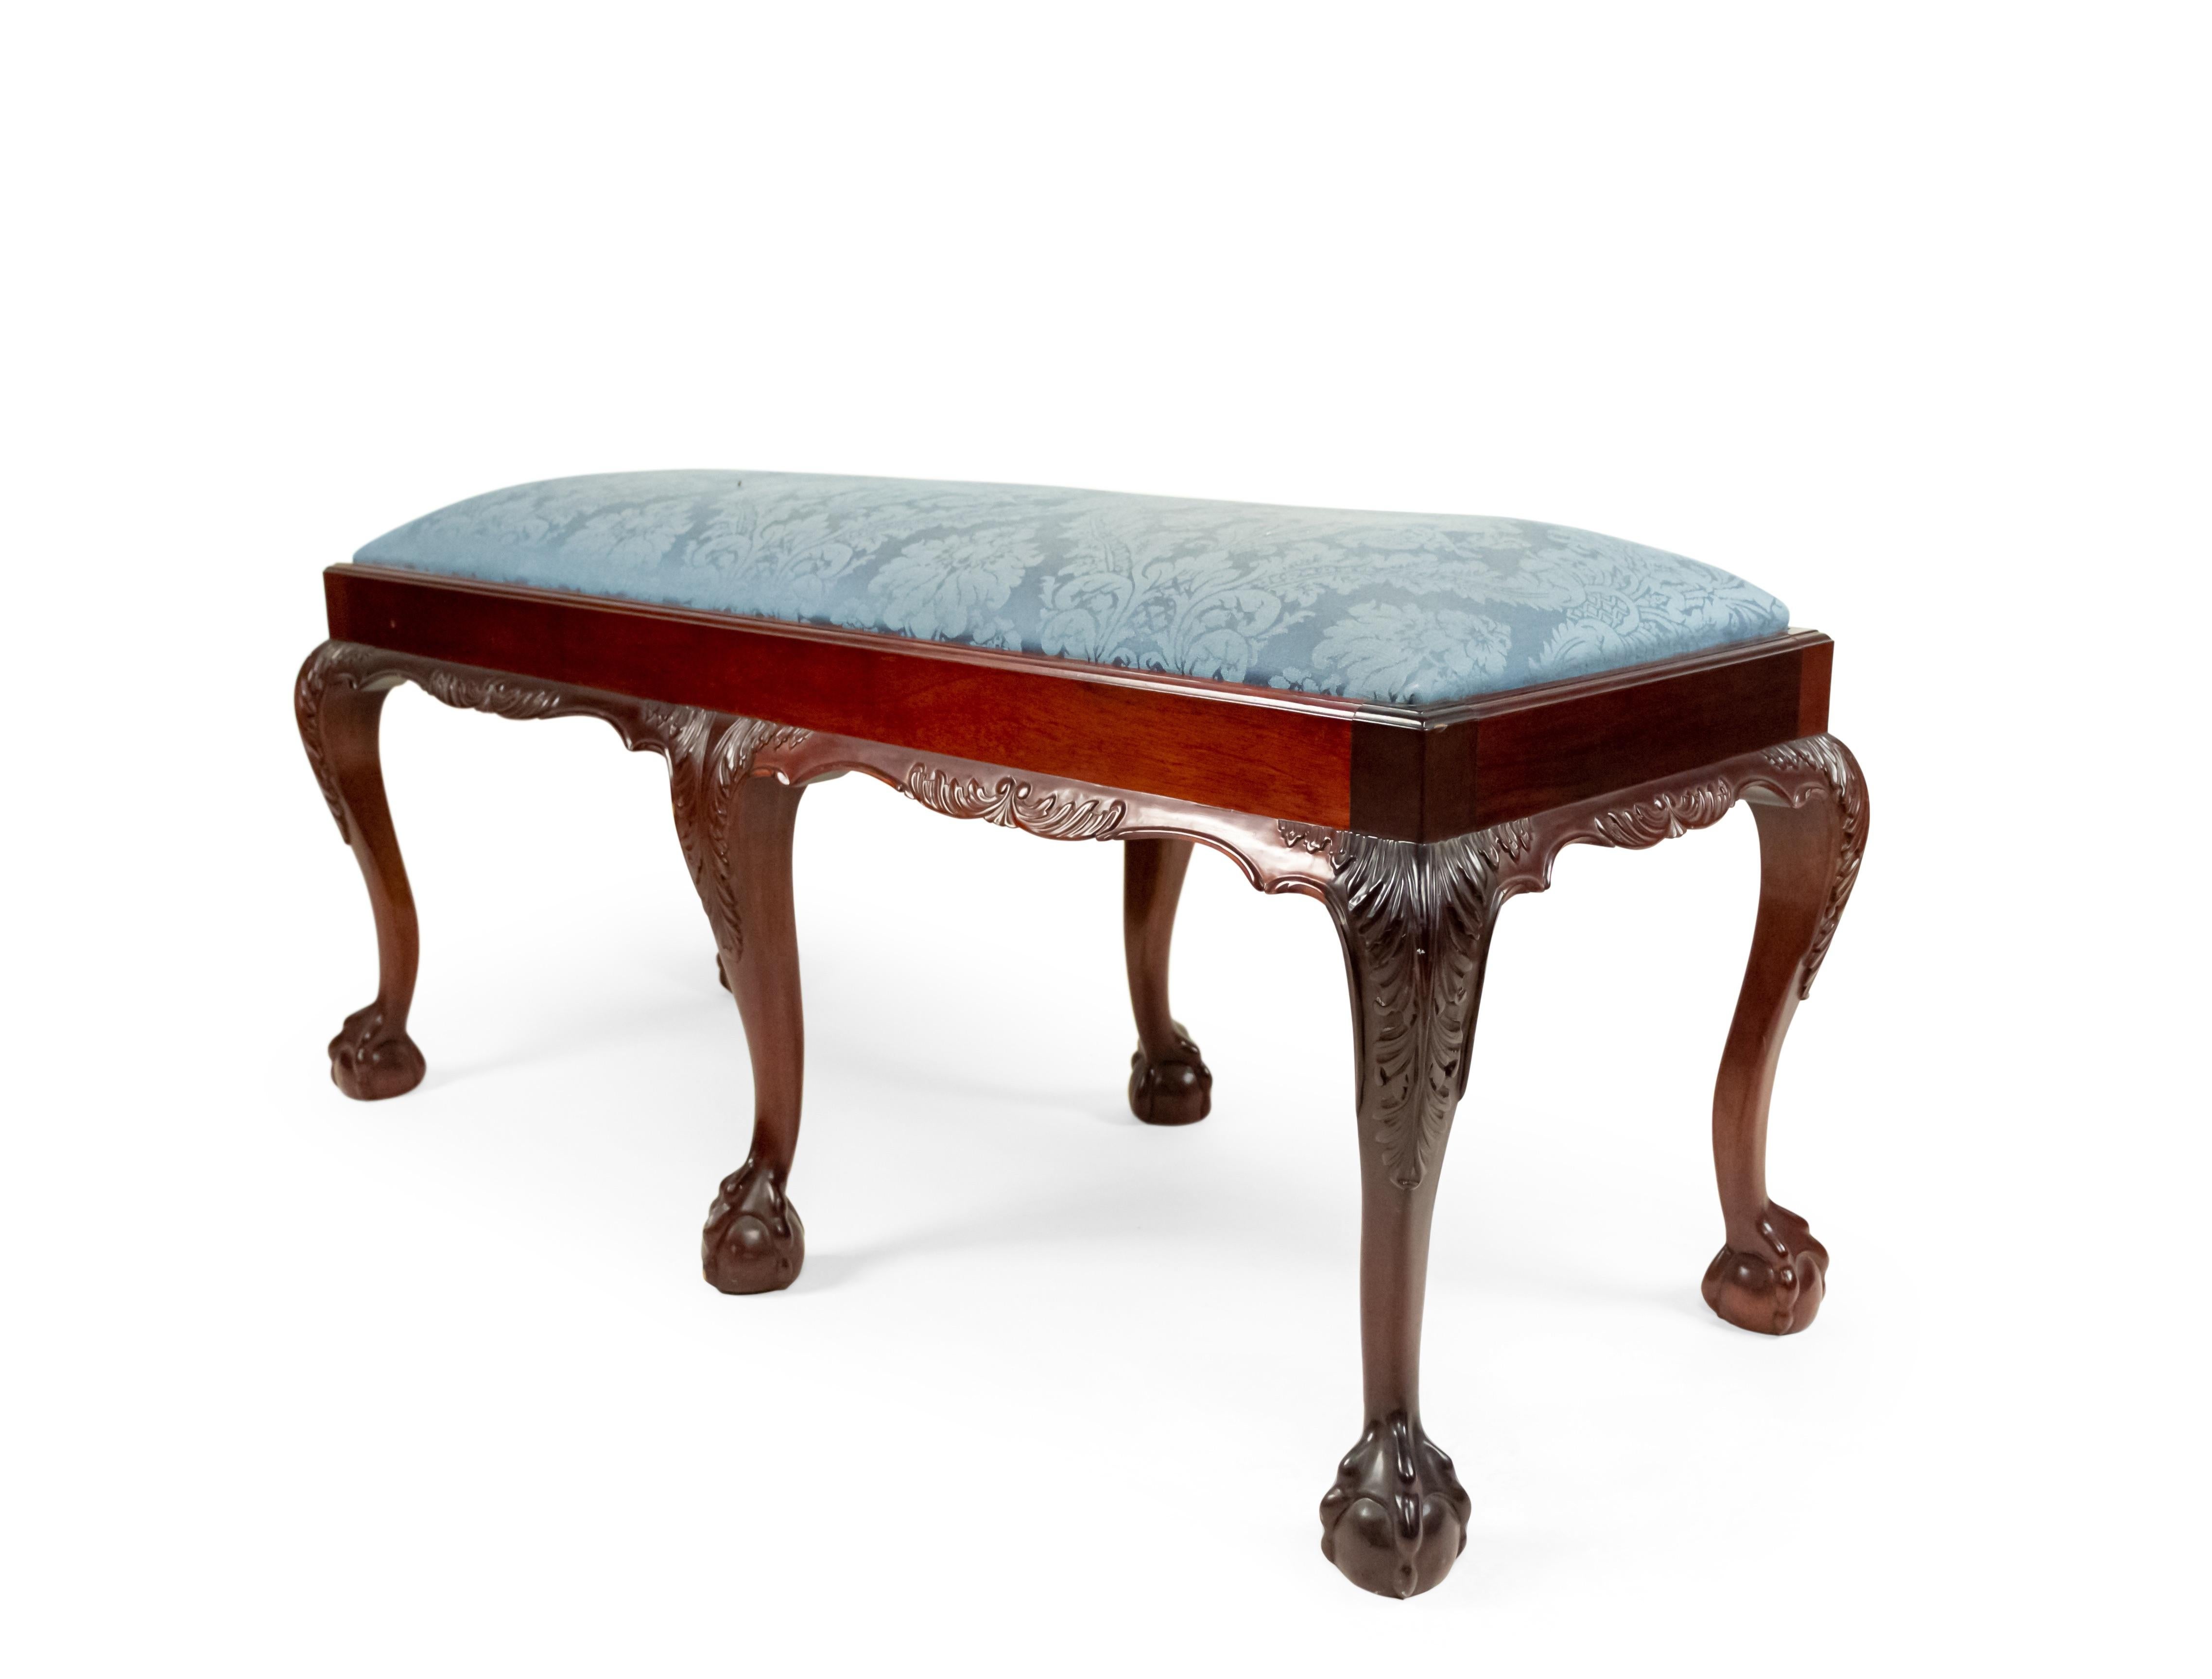 English Chippendale style mahogany 6 legged benches with slip seat. (20th century).